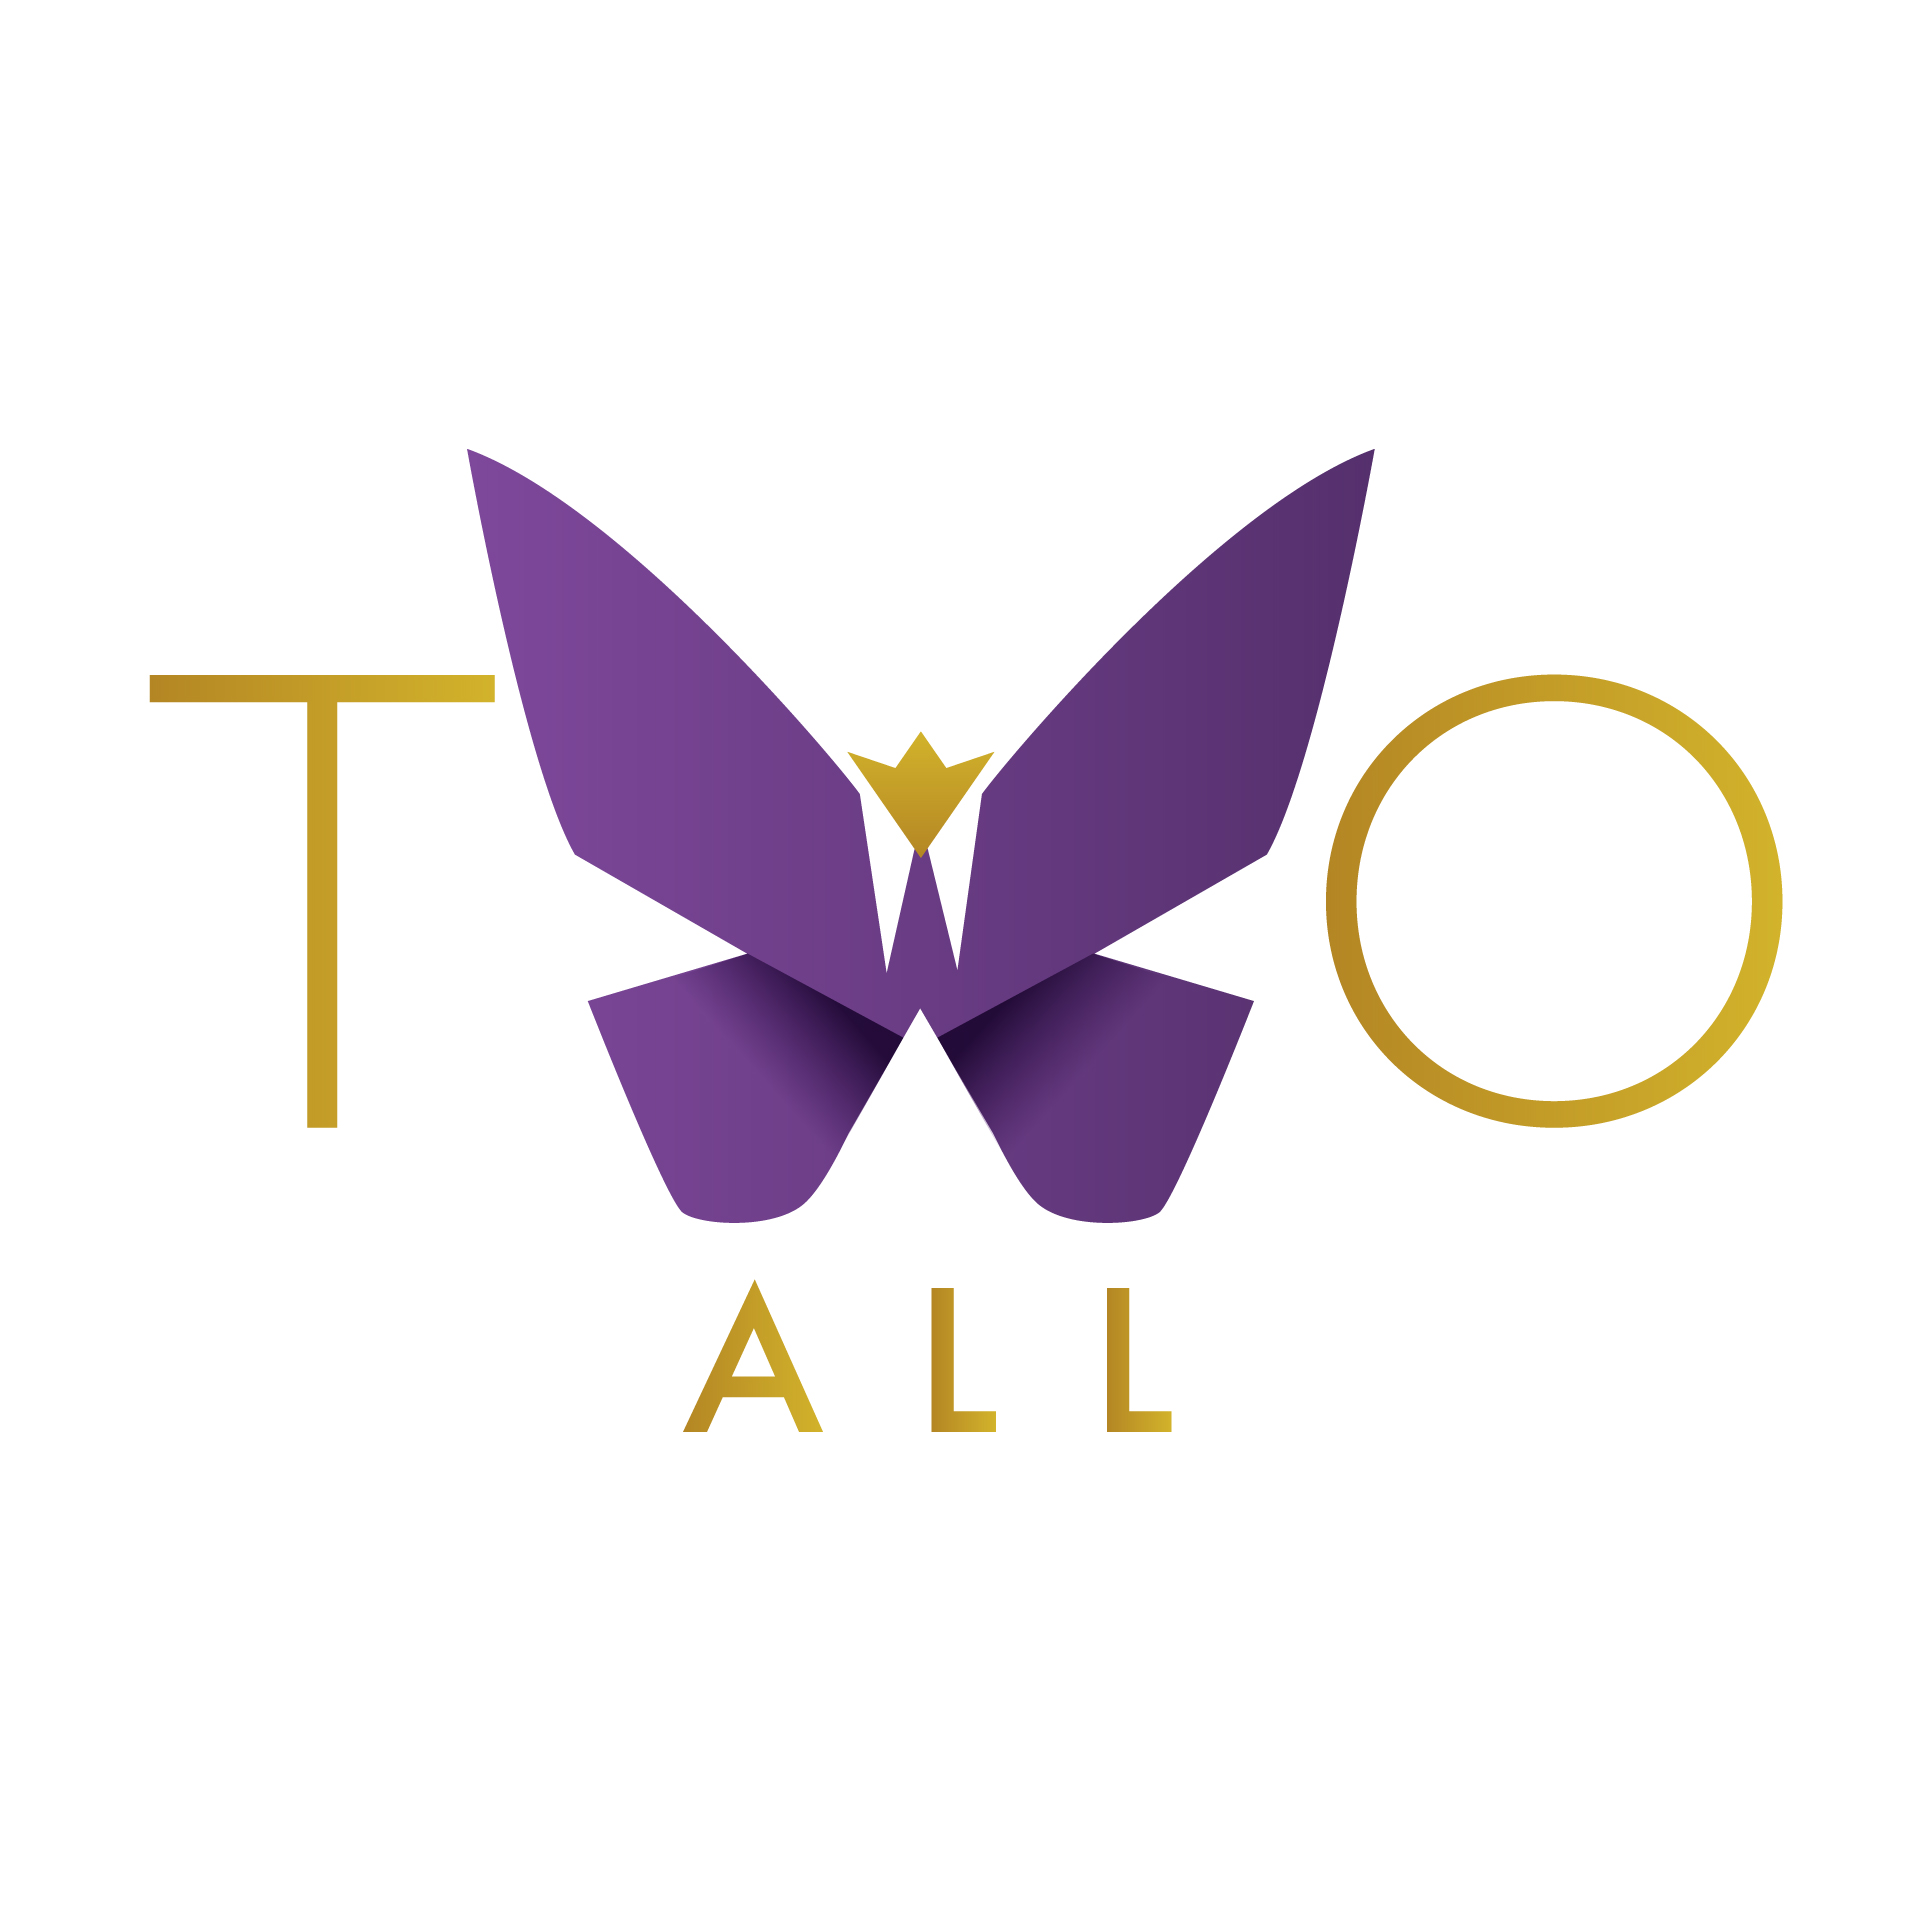 Two All Foundation logo